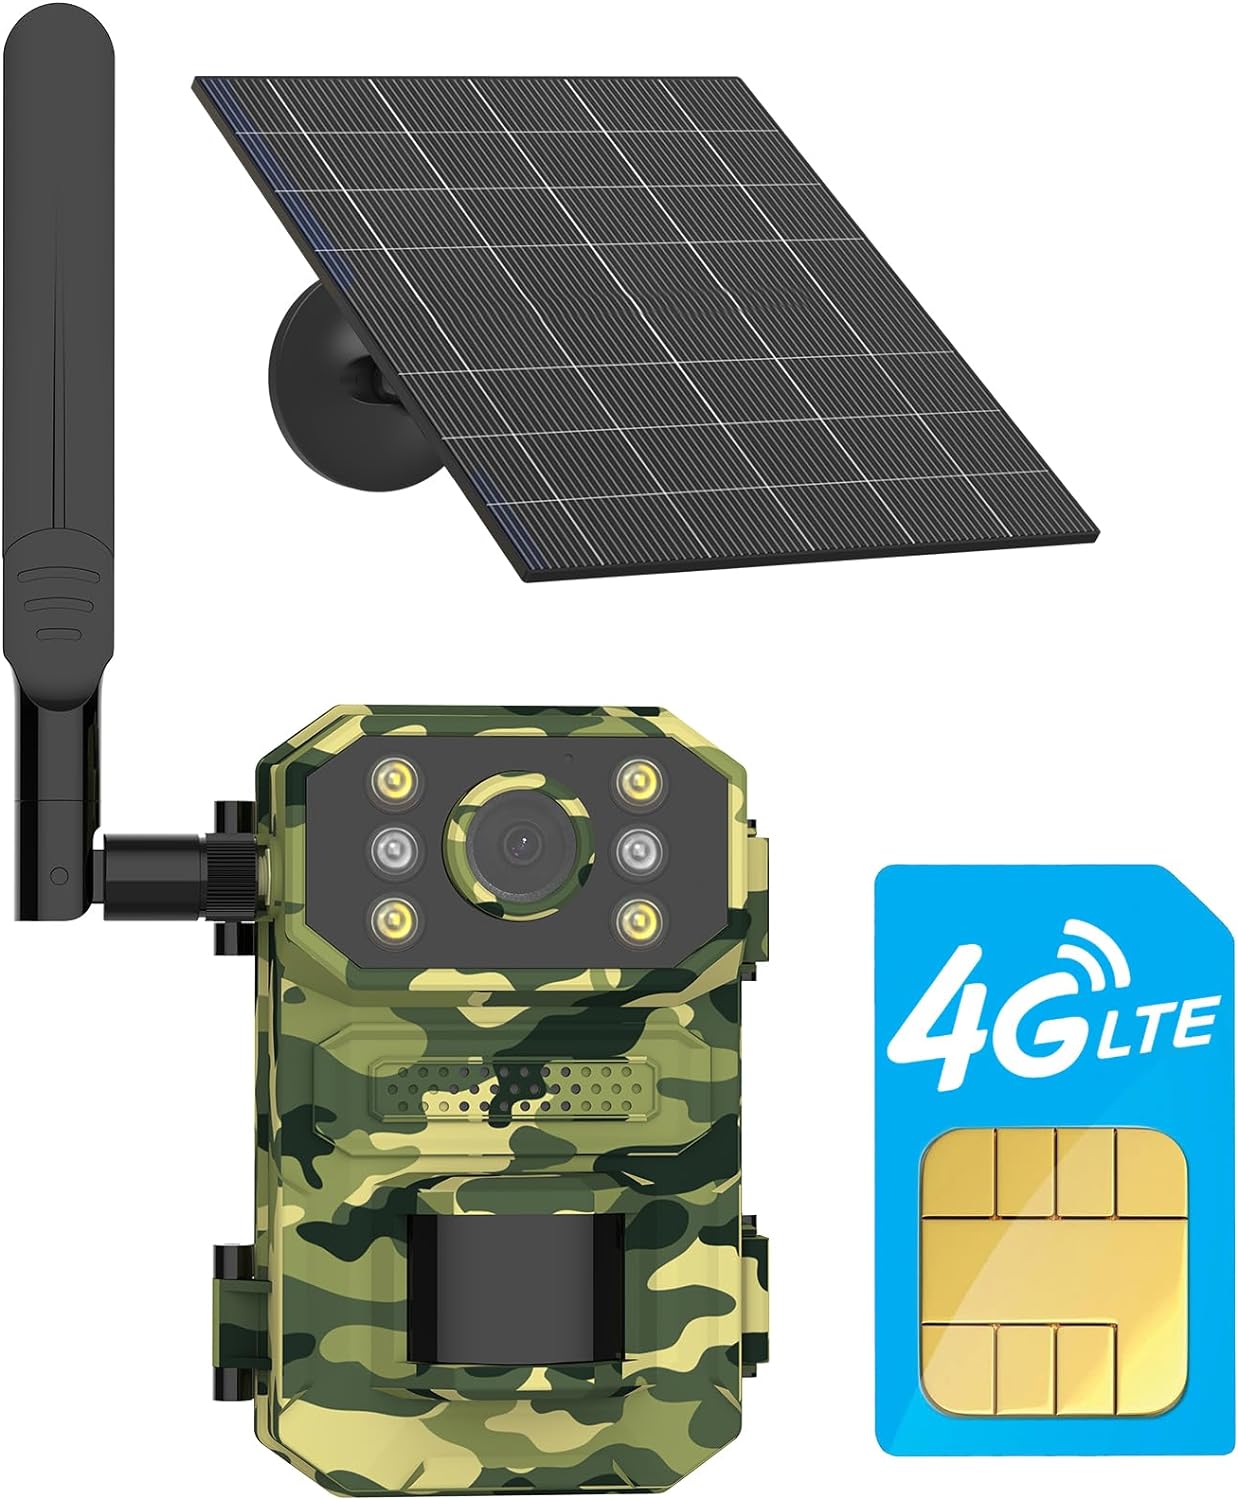 4G LTE Cellular Trail Camera 2.7K 14MP Photos,5W Solar Hunting Camera Work with Pre-Installed SIM Card Only,Wildlife Camera with 7800mAh Battery,PIR Motion,Night Vision,IP67,Cloud/Local S